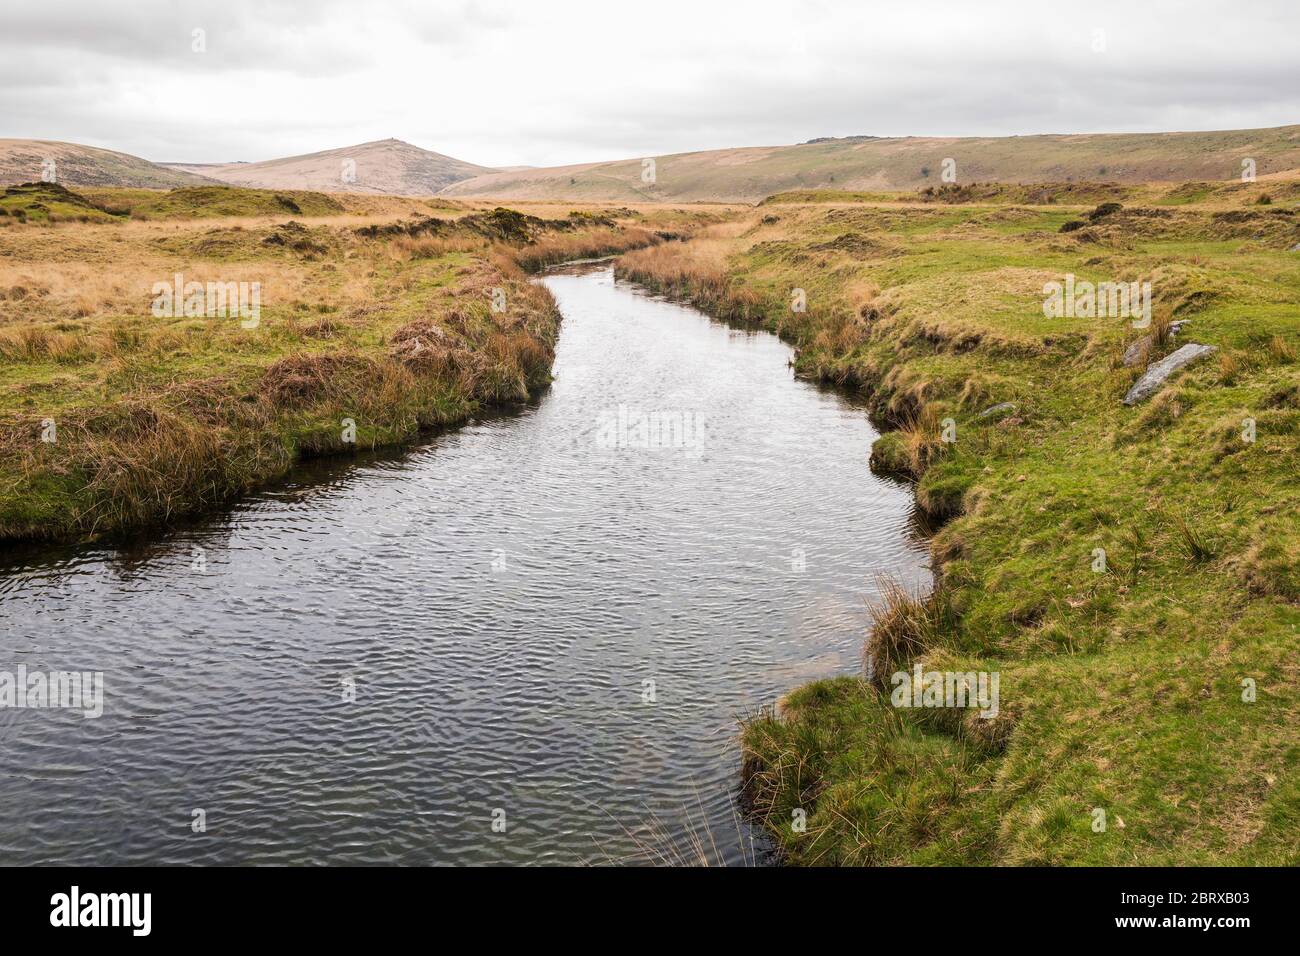 The River Taw flowing across Taw Marsh near Belstone, with Steeperton and Oke Tors in the distance.  Dartmoor National Park, Devon, England, UK. Stock Photo